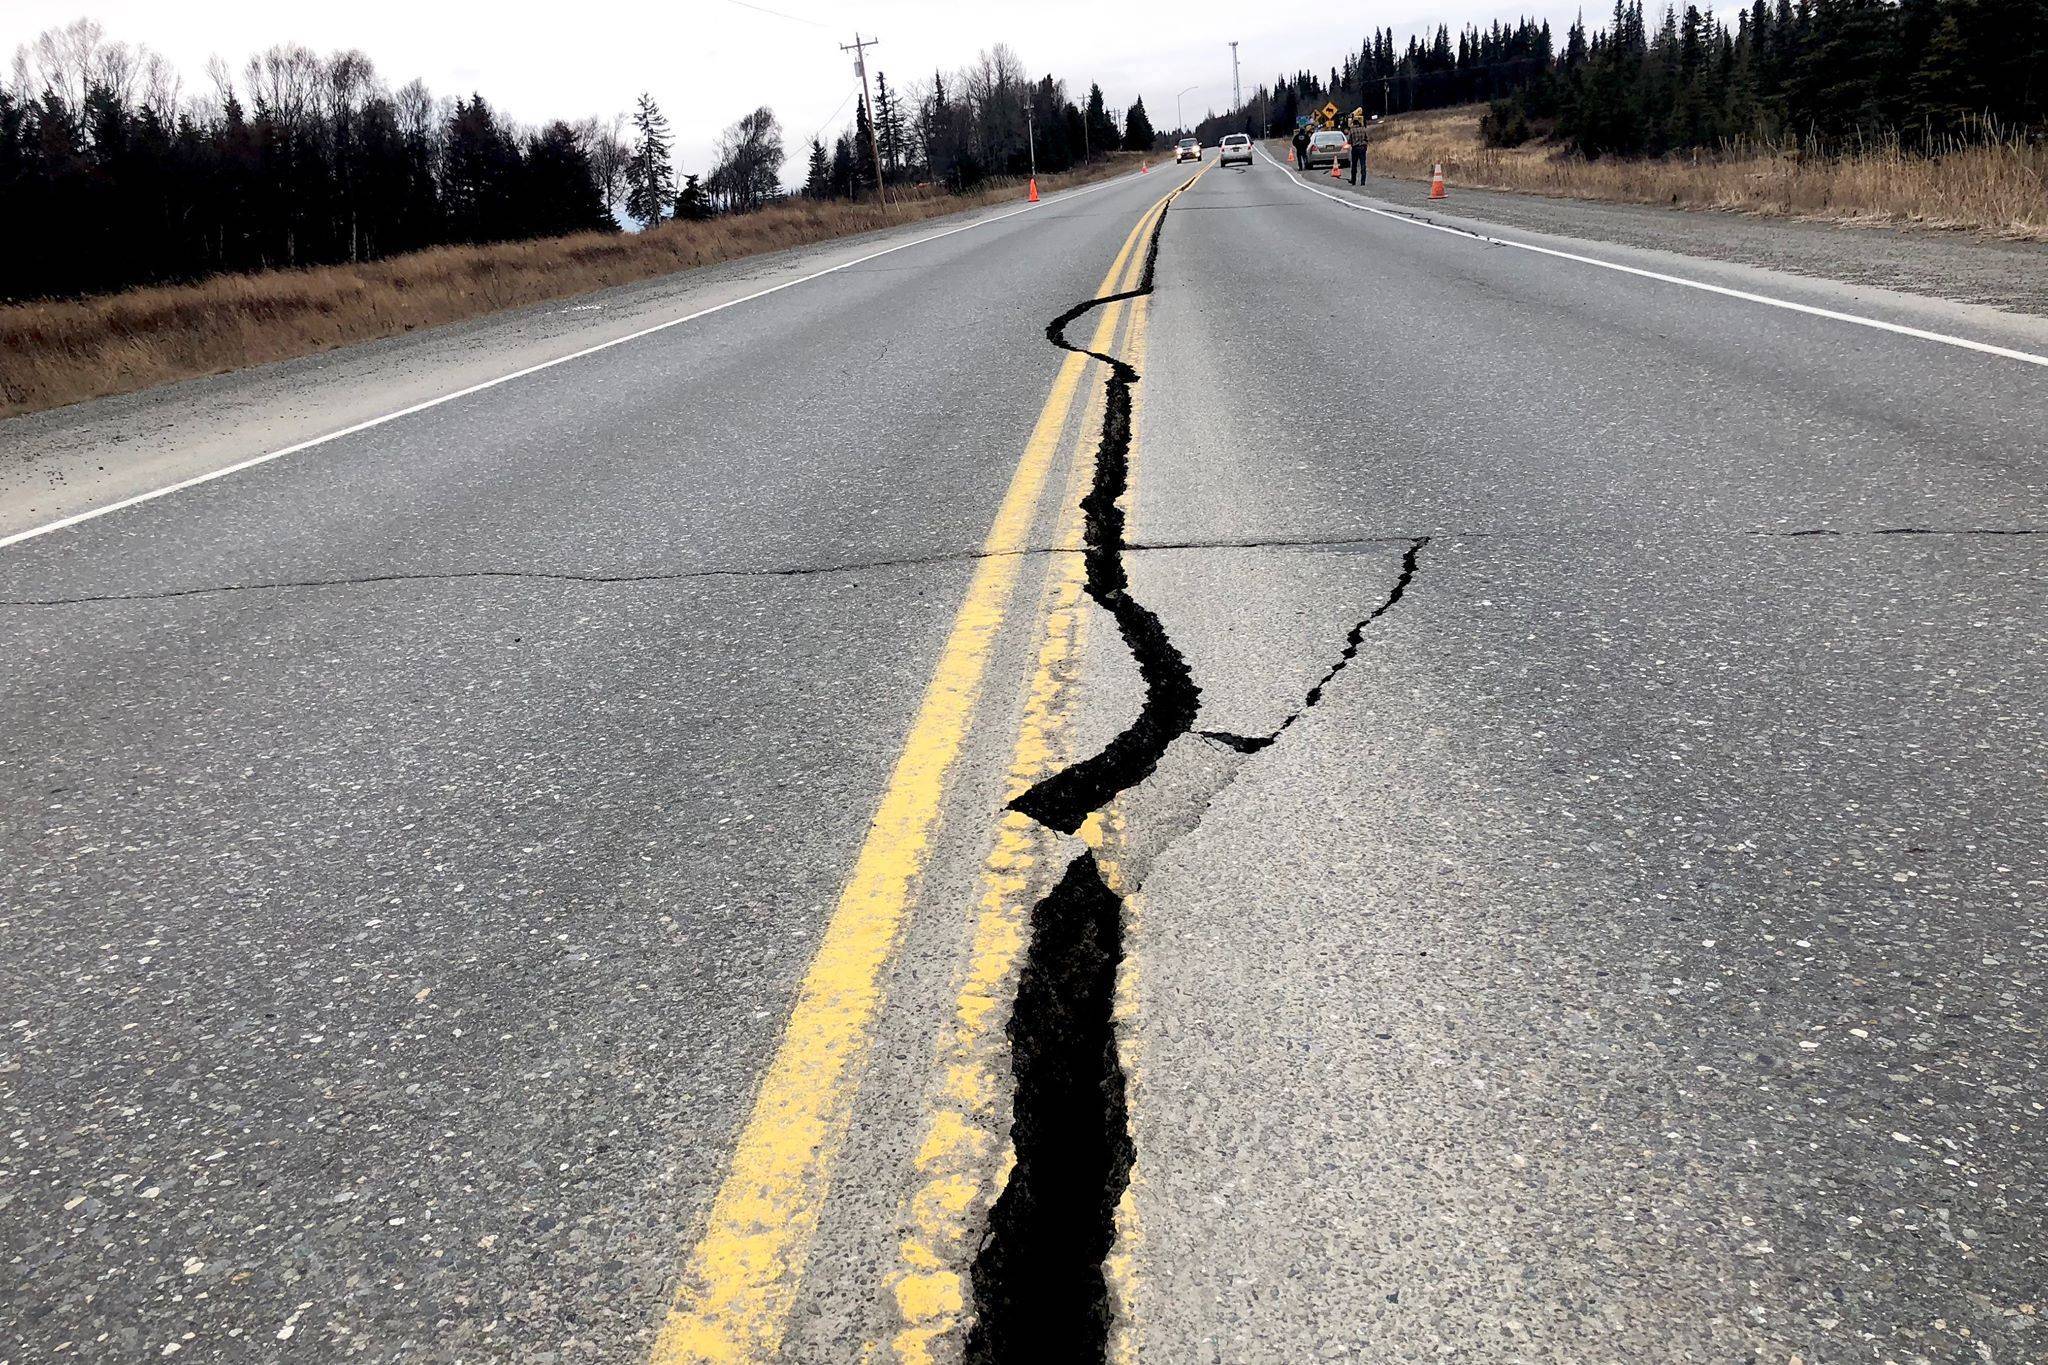 A long crack stretches along a length of road in Nikiski, Alaska on Friday, Nov. 30, 2018 due to a 7.0 magnitude earthquake that shook the Kenai Peninsula, along with the Anchorage, Wasilla and Palmer areas. (Photo by Victoria Petersen/Peninsula Clarion)